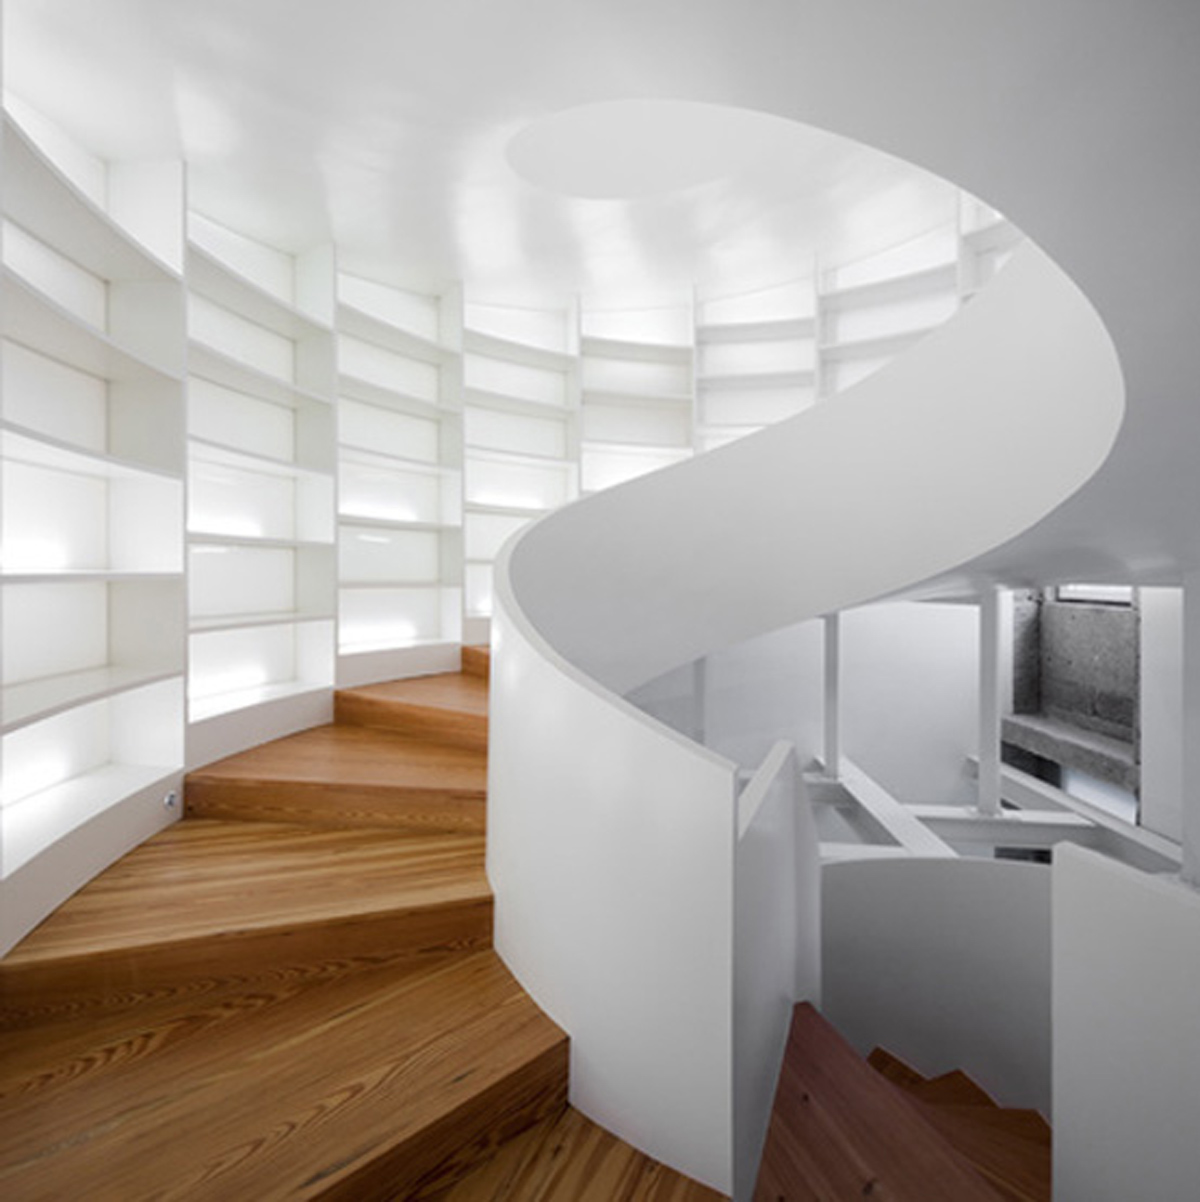 inspiring-interior-architecture-fantastic-white-spiral-staircase-in-modern-design-looks-with-wooden-accent-on-rung-fascinating-spiral-staircase-plans.jpg